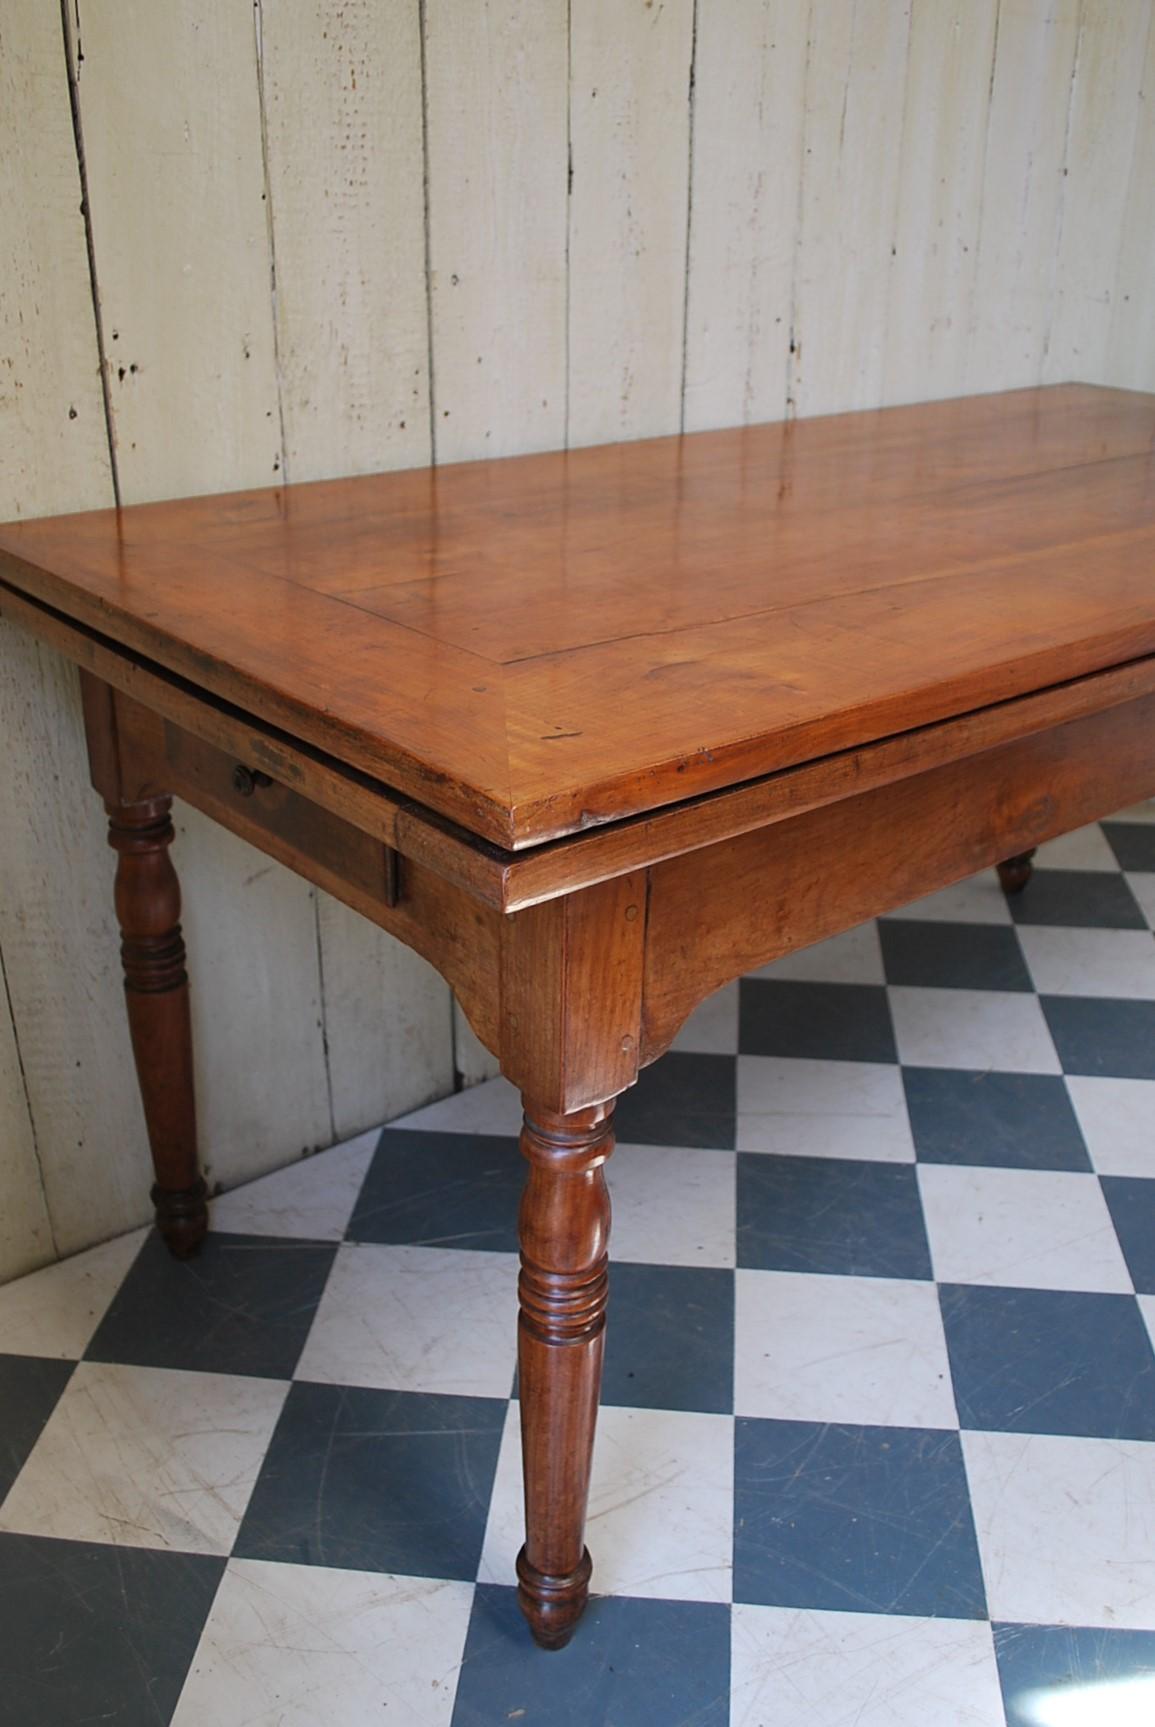 A very good quality early 19th century French cherrywood farmhouse table with extending ends. Beautifully patinated and figured top with a framed border, standing on well proportioned turned legs. The original shaped frieze incorporates a cutlery